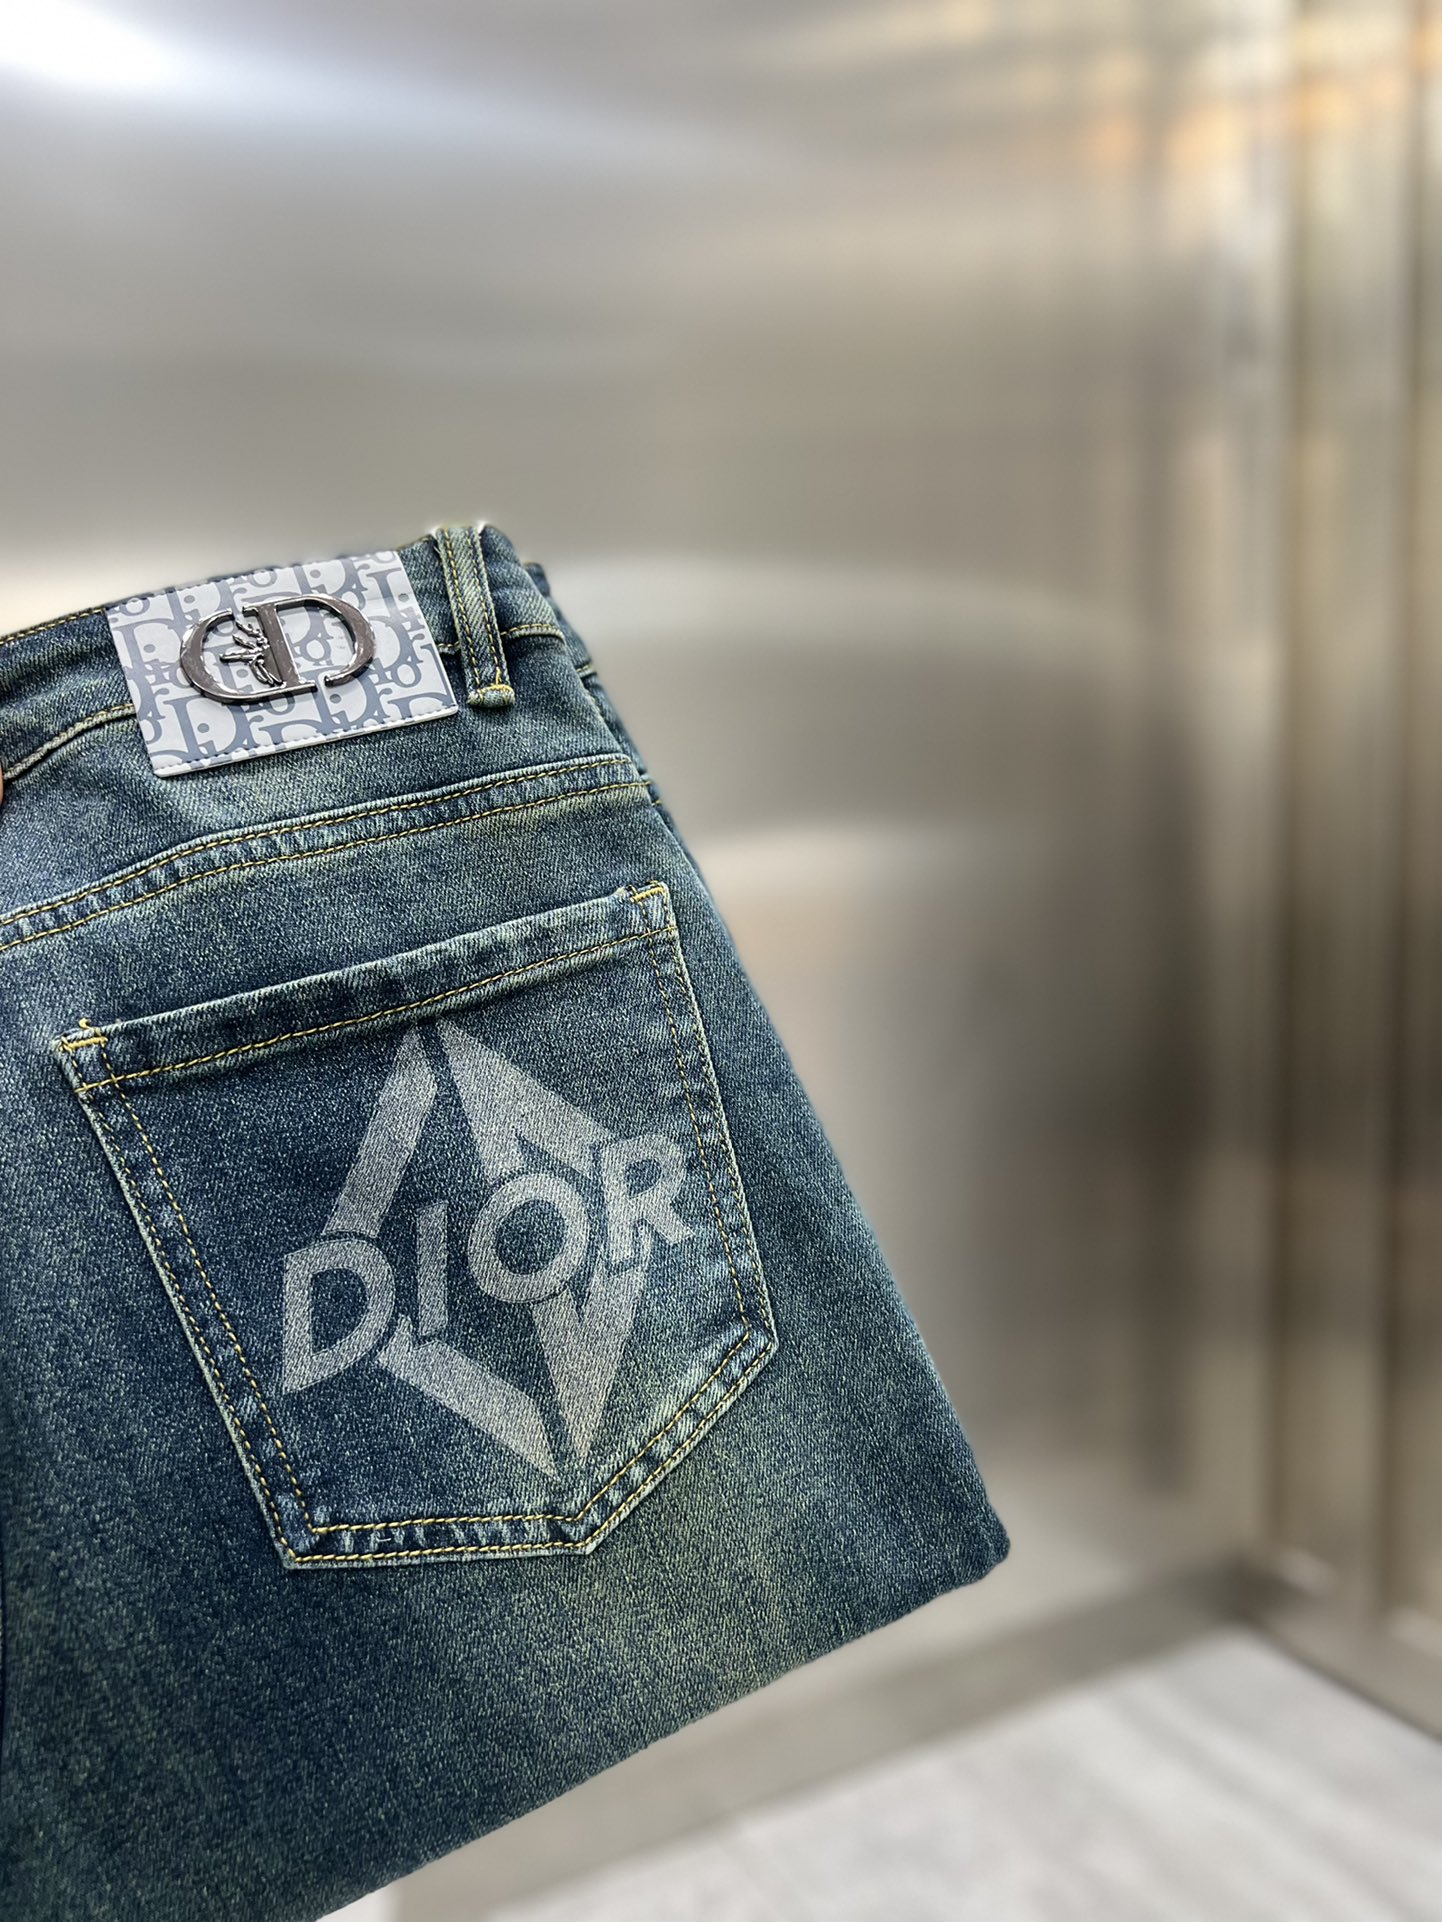 Dior Clothing Jeans Fall/Winter Collection